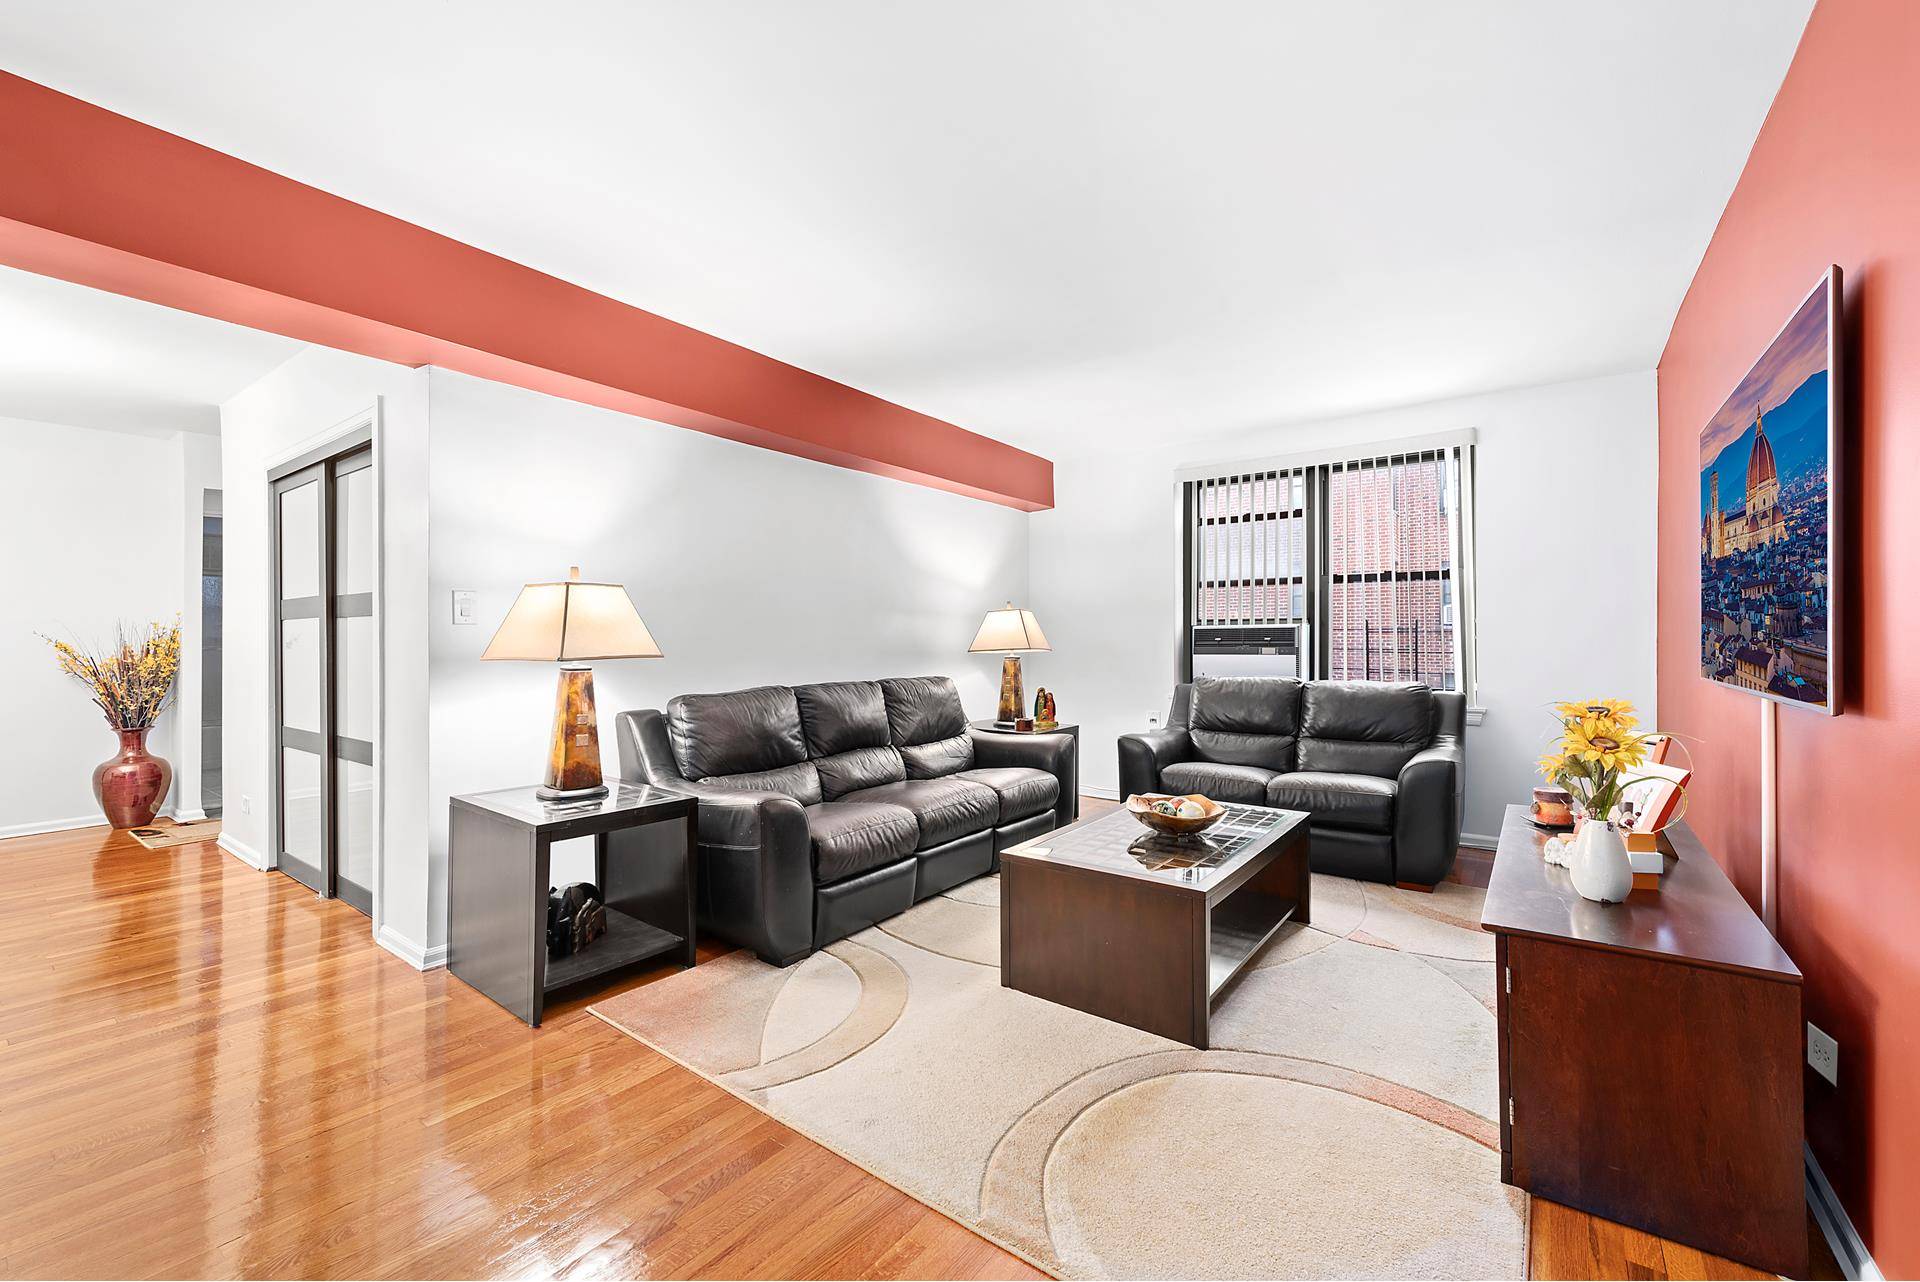 Mint condition two bedroom, one bath apartment in the heart Jackson Heights.